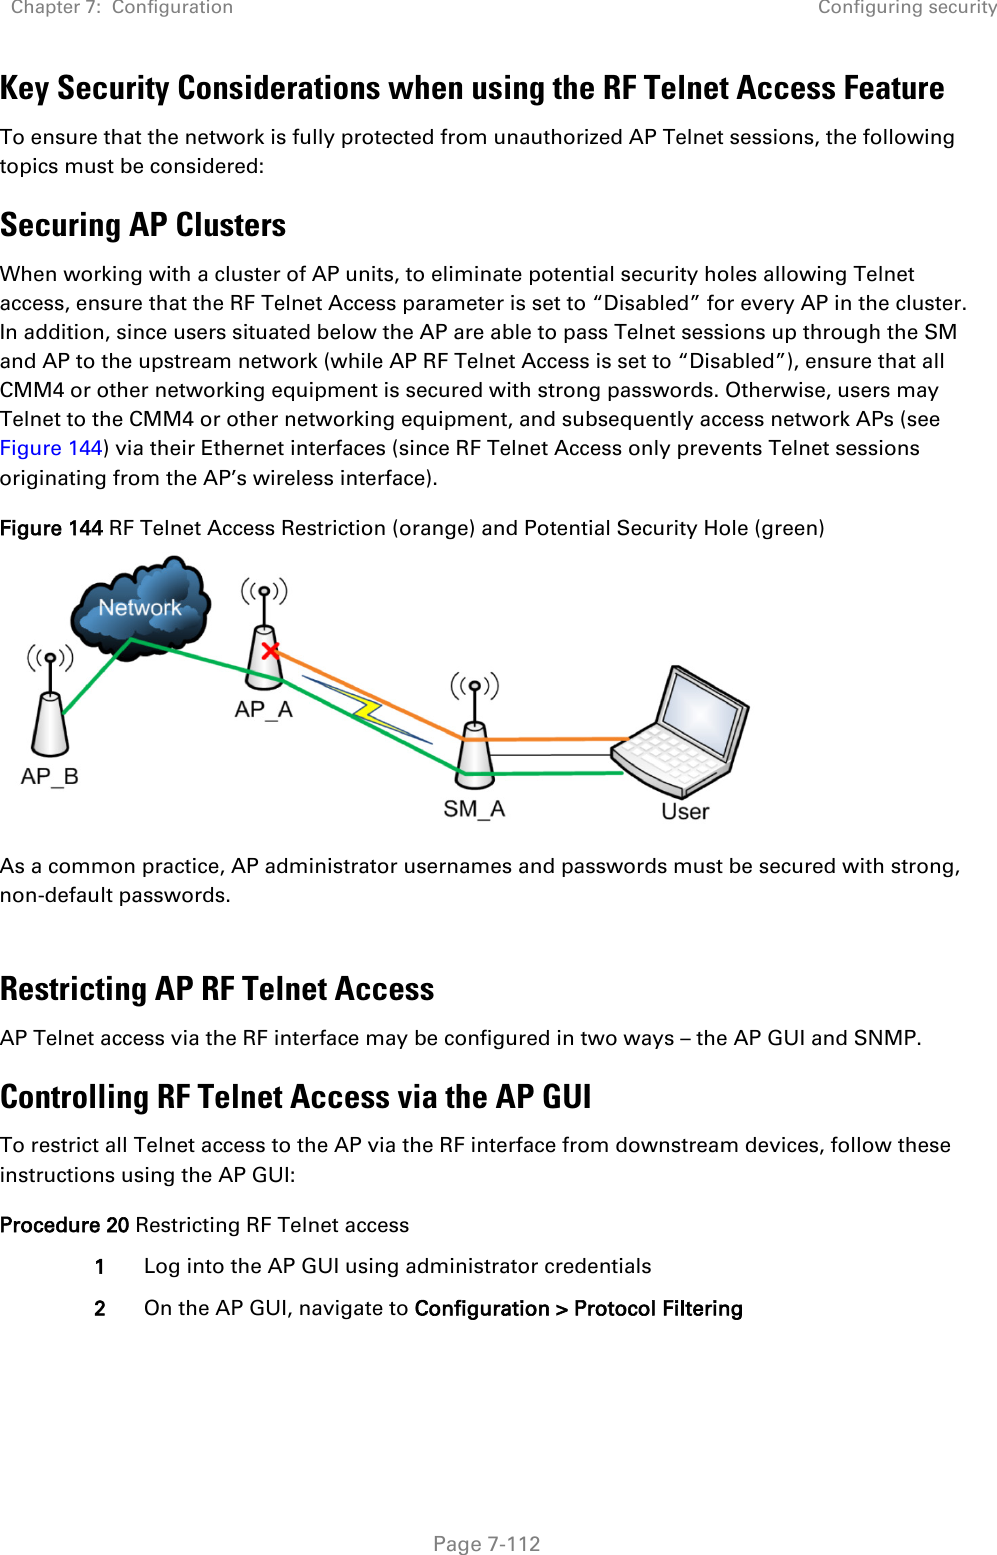 Chapter 7:  Configuration Configuring security   Page 7-112 Key Security Considerations when using the RF Telnet Access Feature To ensure that the network is fully protected from unauthorized AP Telnet sessions, the following topics must be considered: Securing AP Clusters When working with a cluster of AP units, to eliminate potential security holes allowing Telnet access, ensure that the RF Telnet Access parameter is set to “Disabled” for every AP in the cluster. In addition, since users situated below the AP are able to pass Telnet sessions up through the SM and AP to the upstream network (while AP RF Telnet Access is set to “Disabled”), ensure that all CMM4 or other networking equipment is secured with strong passwords. Otherwise, users may Telnet to the CMM4 or other networking equipment, and subsequently access network APs (see Figure 144) via their Ethernet interfaces (since RF Telnet Access only prevents Telnet sessions originating from the AP’s wireless interface). Figure 144 RF Telnet Access Restriction (orange) and Potential Security Hole (green)  As a common practice, AP administrator usernames and passwords must be secured with strong, non-default passwords.   Restricting AP RF Telnet Access AP Telnet access via the RF interface may be configured in two ways – the AP GUI and SNMP. Controlling RF Telnet Access via the AP GUI To restrict all Telnet access to the AP via the RF interface from downstream devices, follow these instructions using the AP GUI: Procedure 20 Restricting RF Telnet access 1 Log into the AP GUI using administrator credentials 2 On the AP GUI, navigate to Configuration &gt; Protocol Filtering 